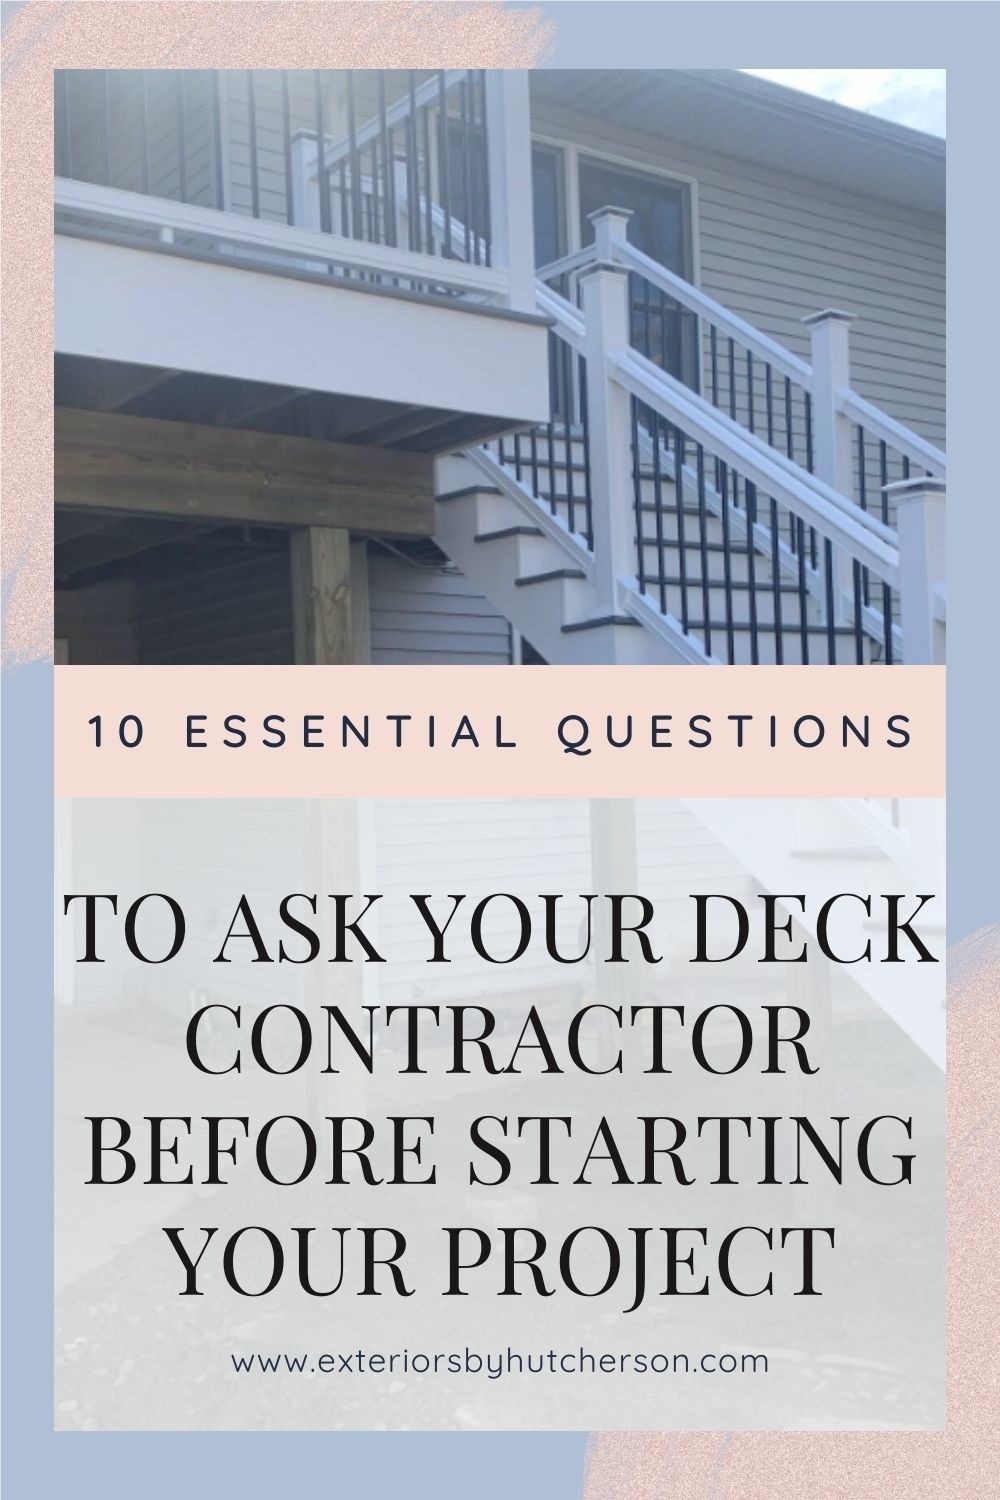 10 Essential Questions to Ask Your Deck Contractor Before Starting Your Project